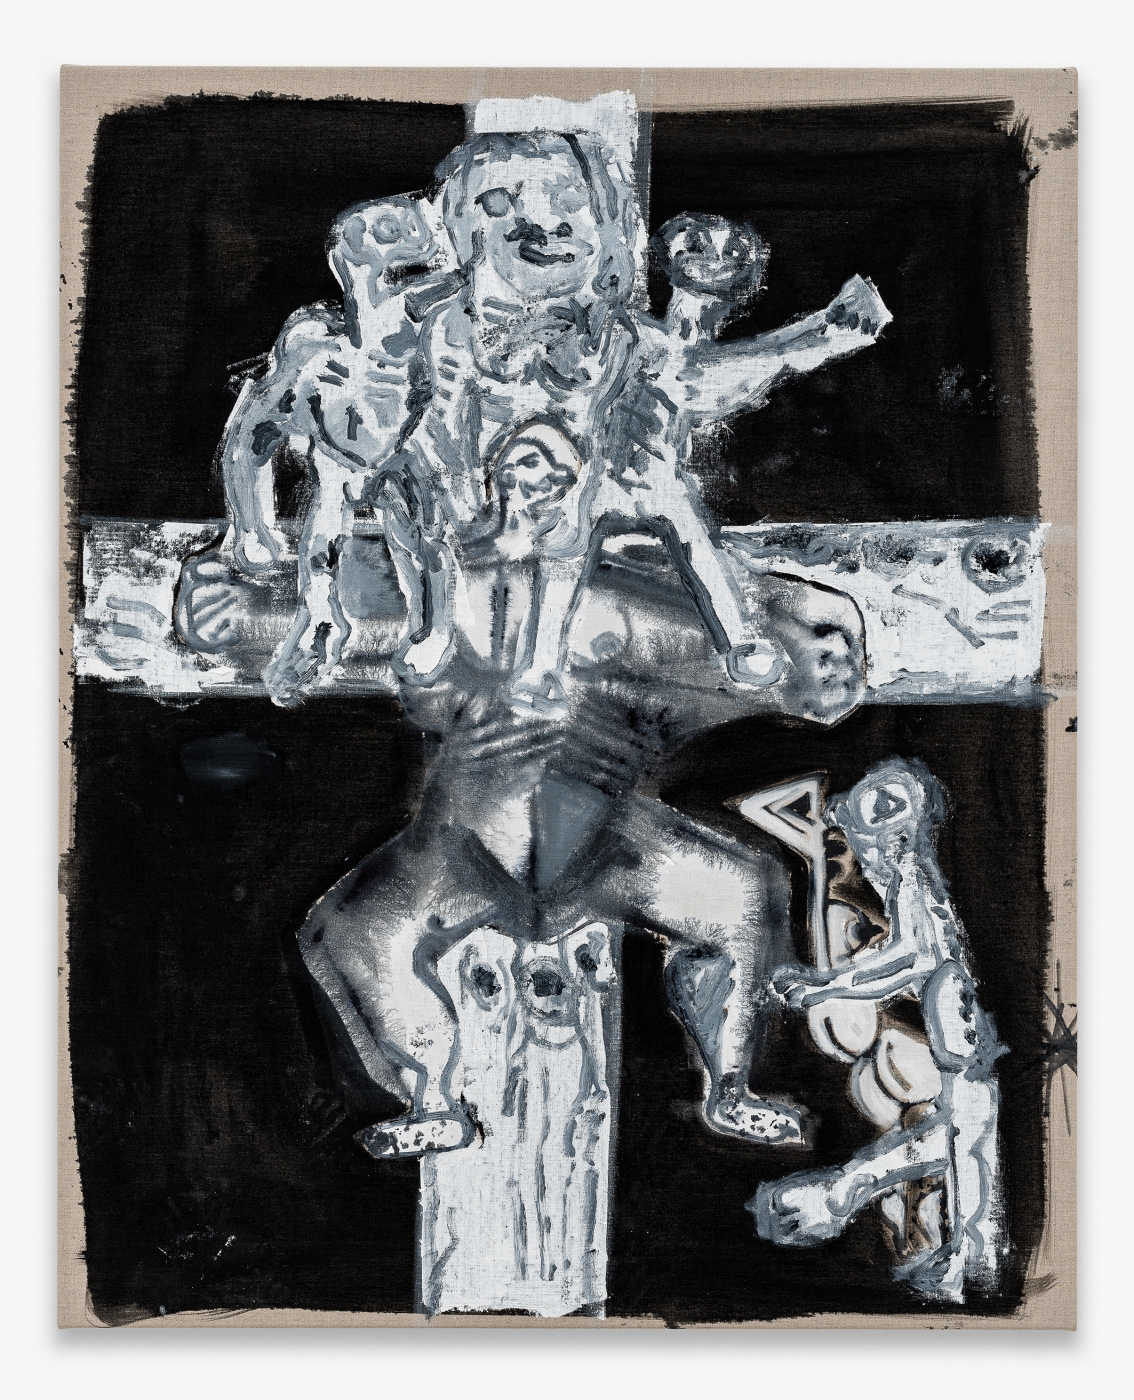 Untitled (Crucifixion),&nbsp;2020
Mixed media on canvas, 114.5 x 92.5 x 3 cm / 45 1/8 x 36 3/8 x 1 1/8 in